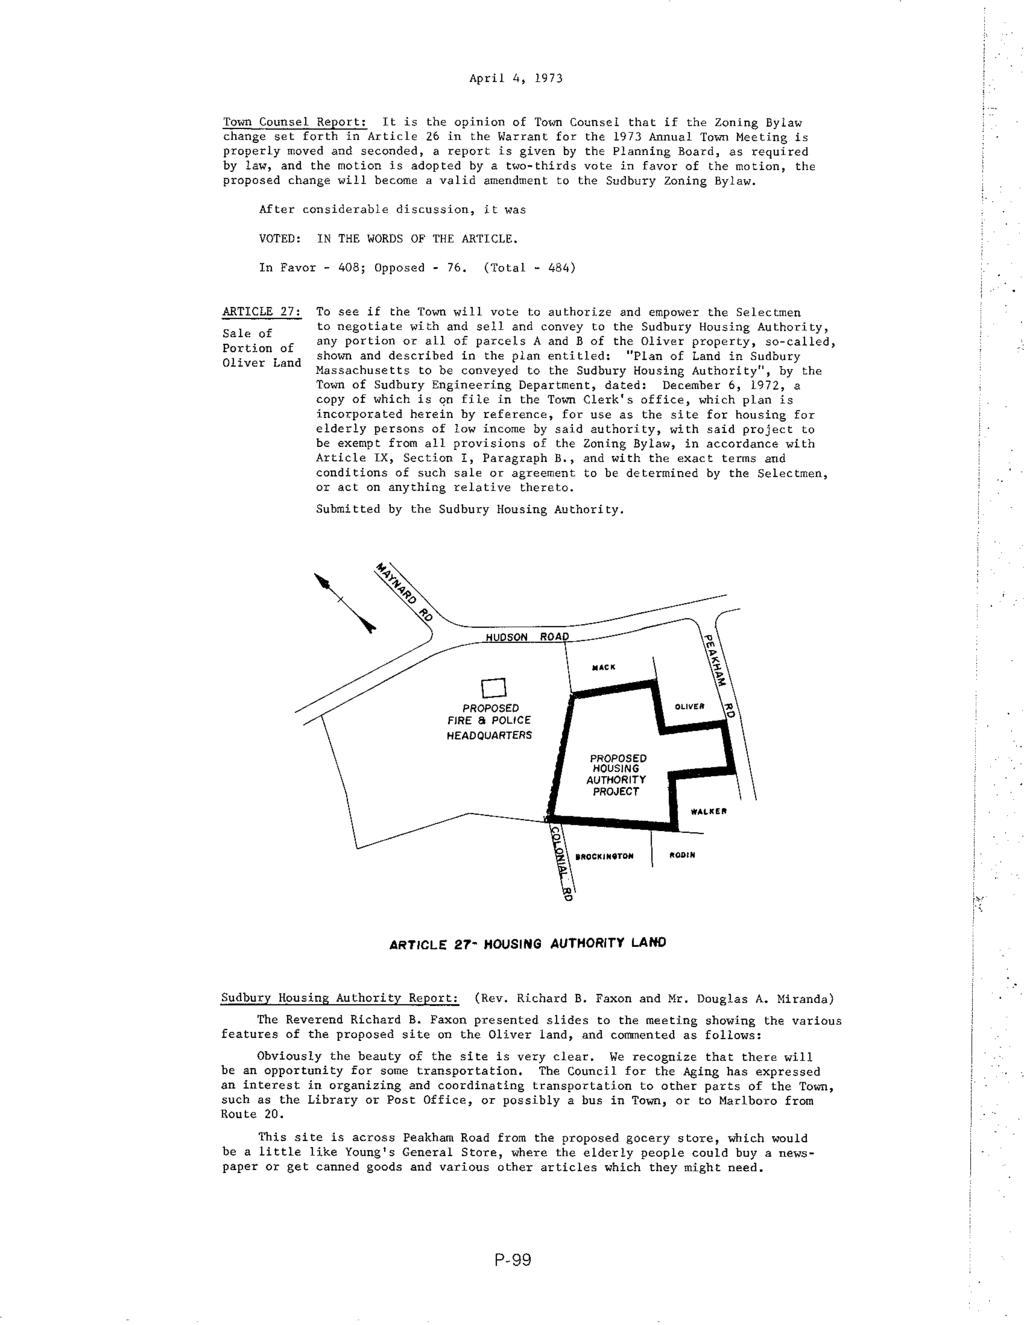 April 4, 1973 Town Counsel Report: It is the op1n1on of Town Counsel that if the Zoning Bylaw change set forth in Article 26 in the Warrant for the 1973 Annual Town Meeting is properly moved and